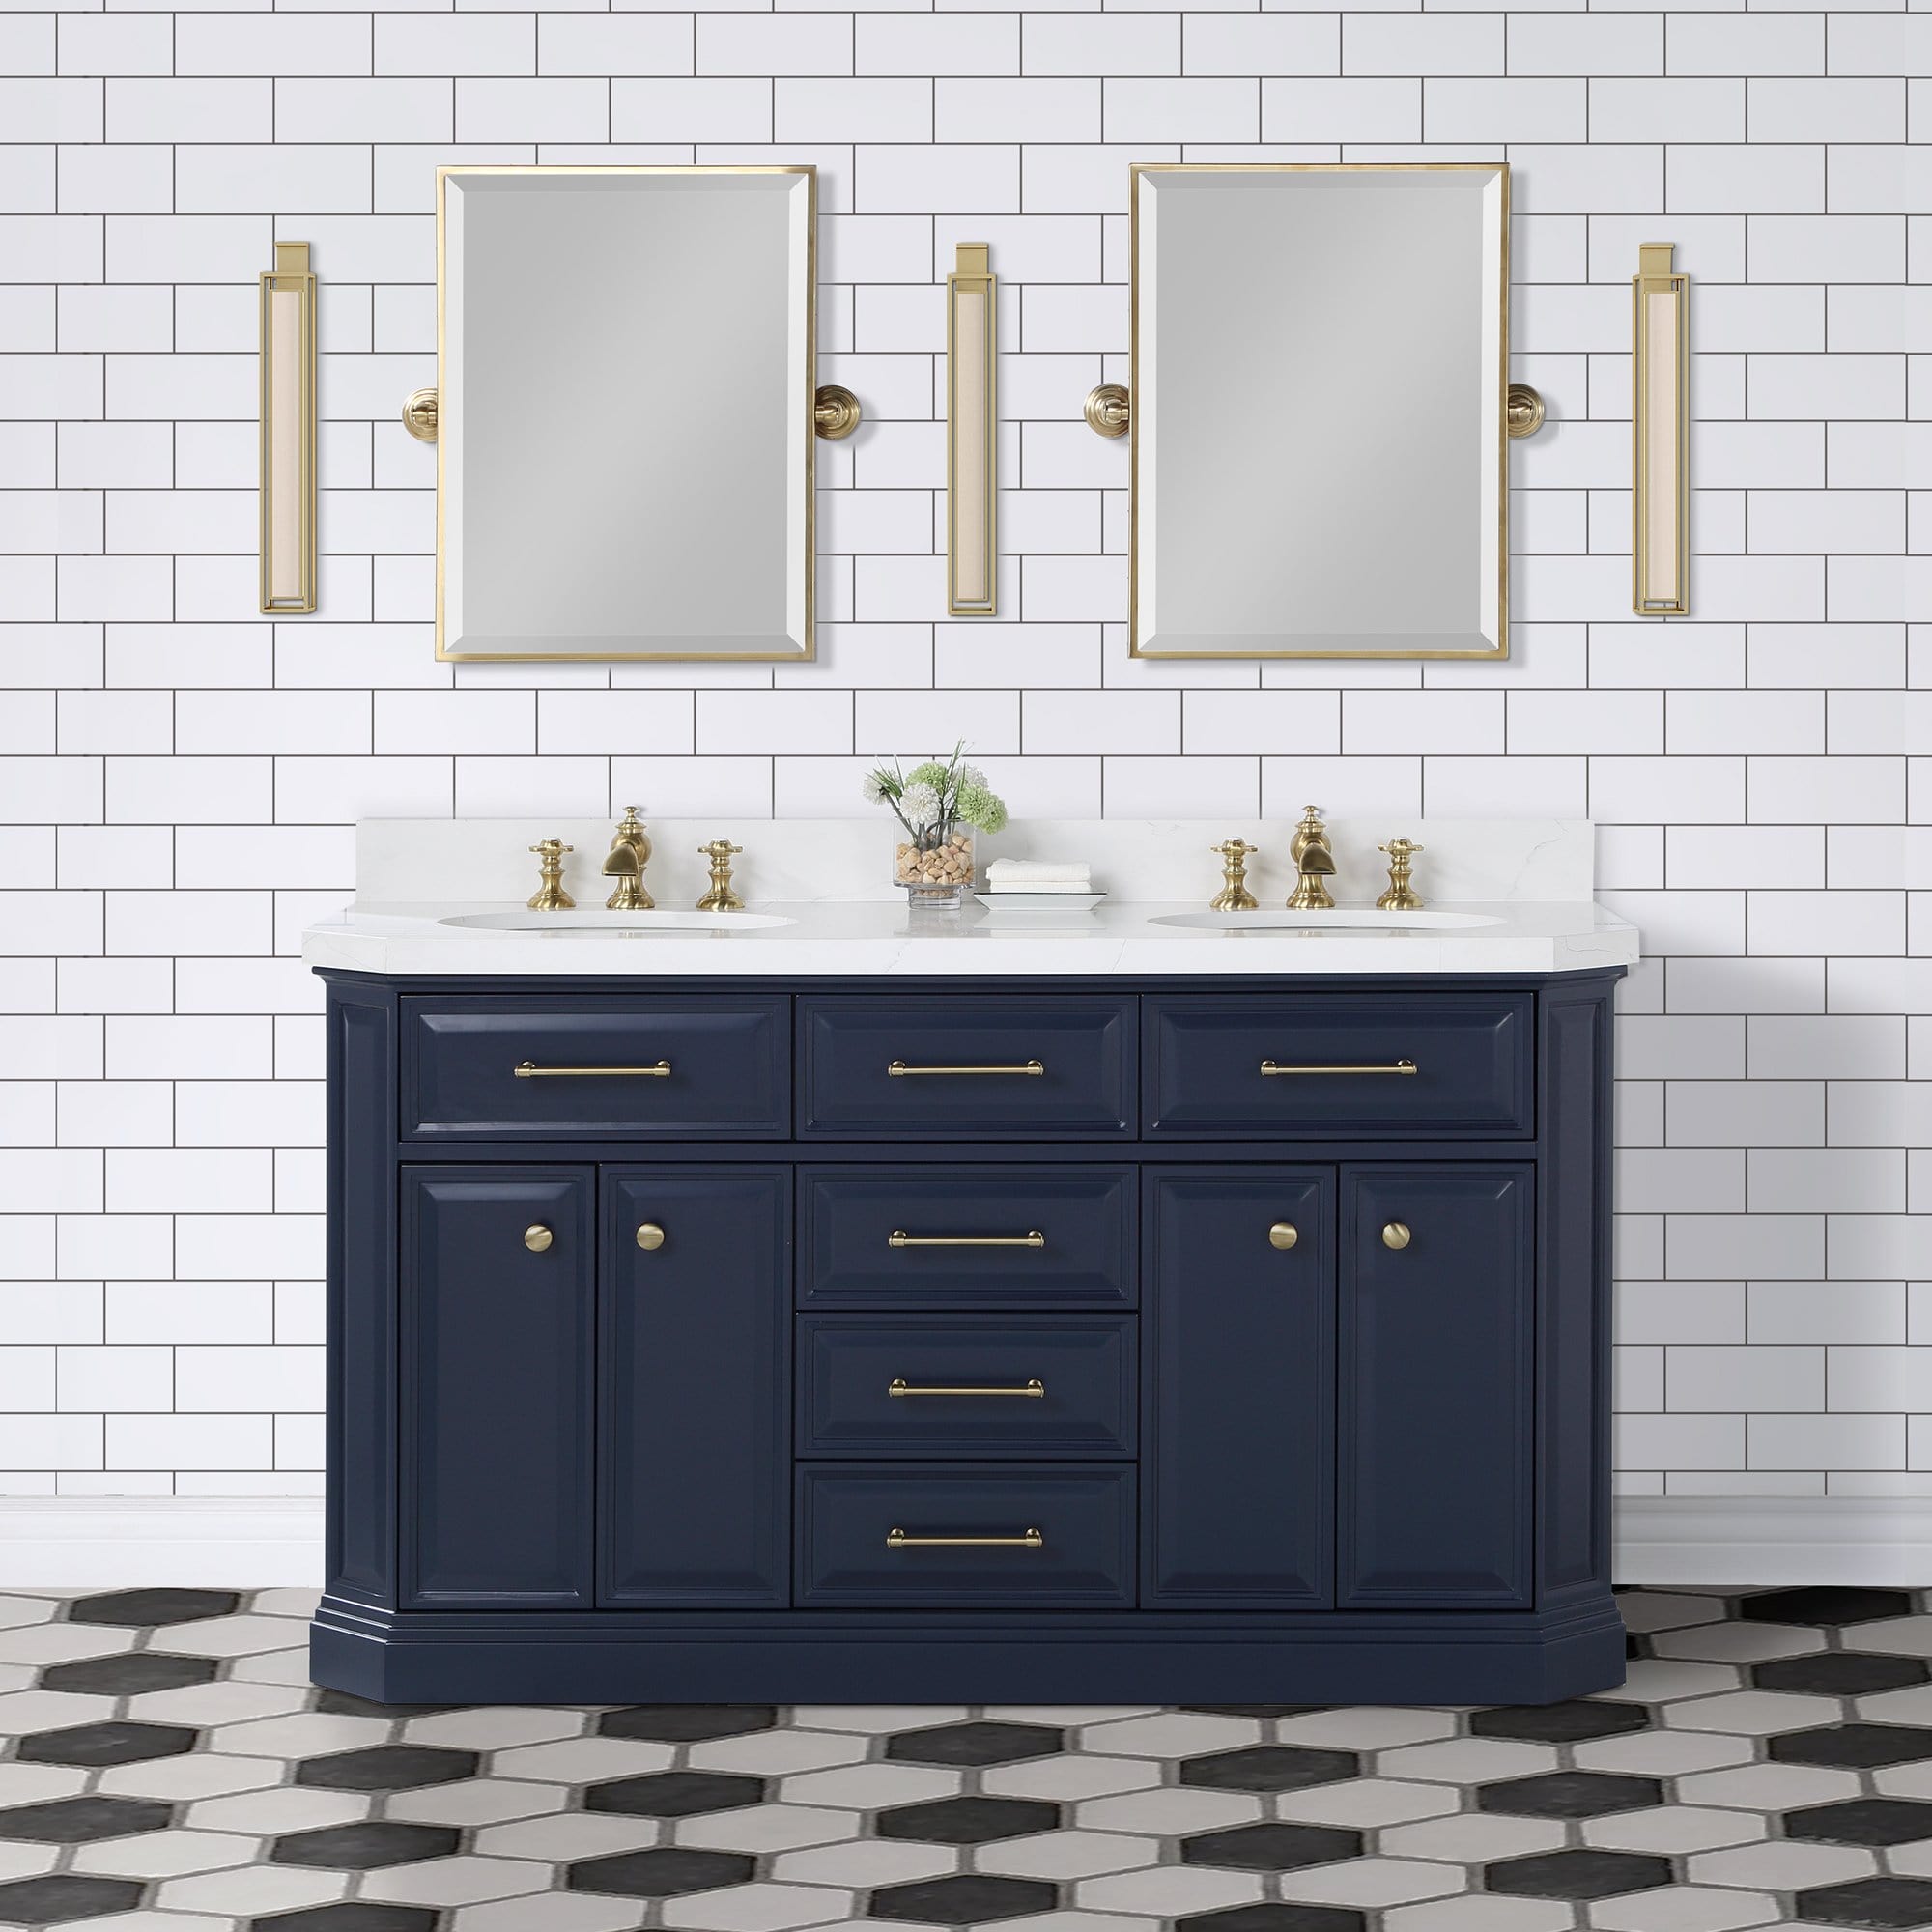 Water Creation Palace 60 In. Double Sink White Quartz Countertop Vanity in Monarch Blue with Waterfall Faucets - Molaix732030765009Bathroom vanityPA60QZ06MB-000FX1306